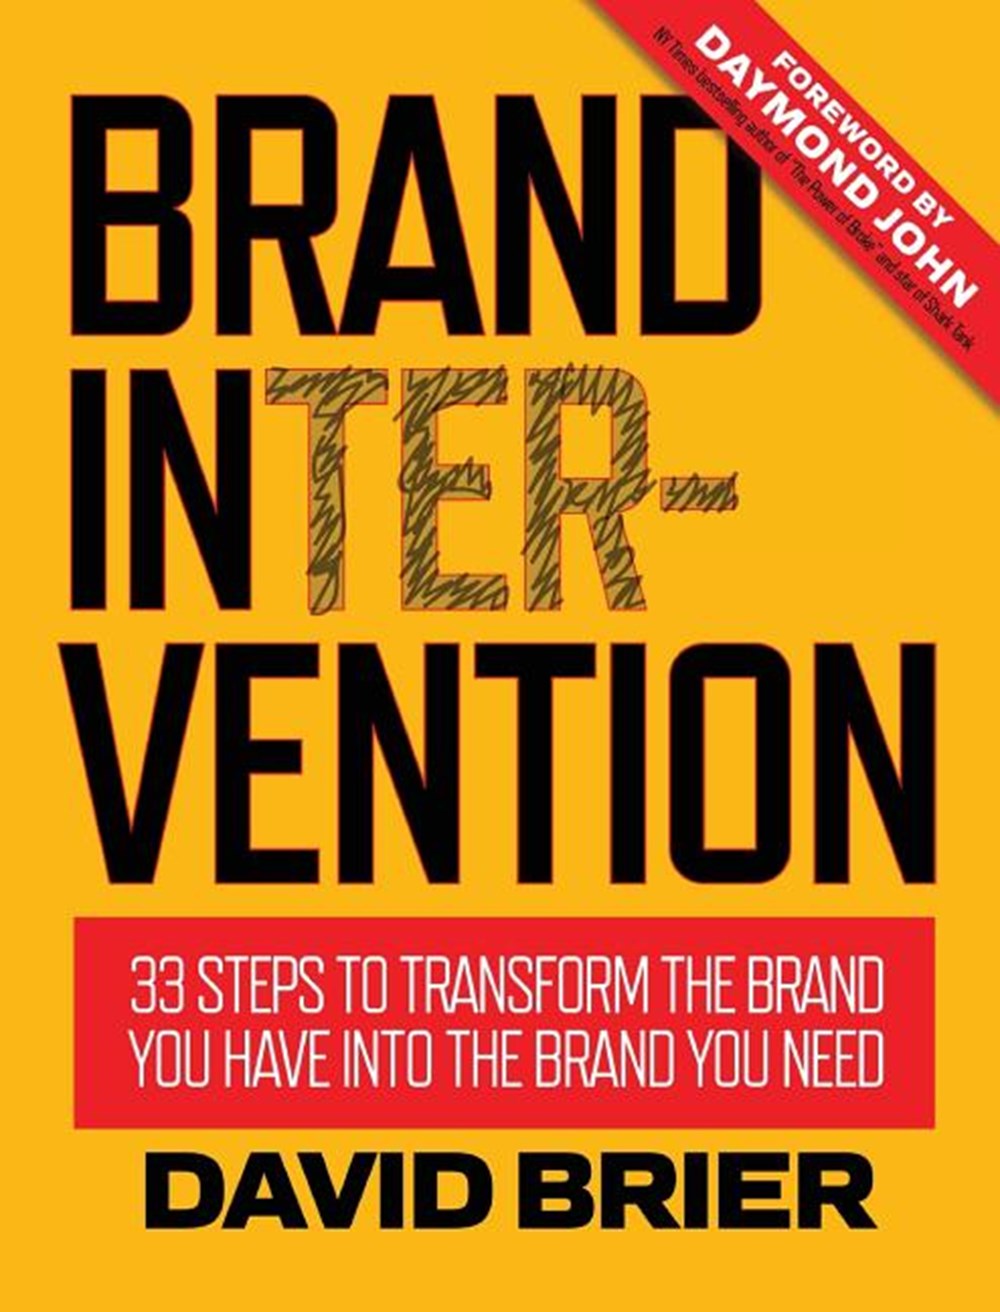 Brand Intervention 33 Steps to Transform the Brand You Have into the Brand You Need